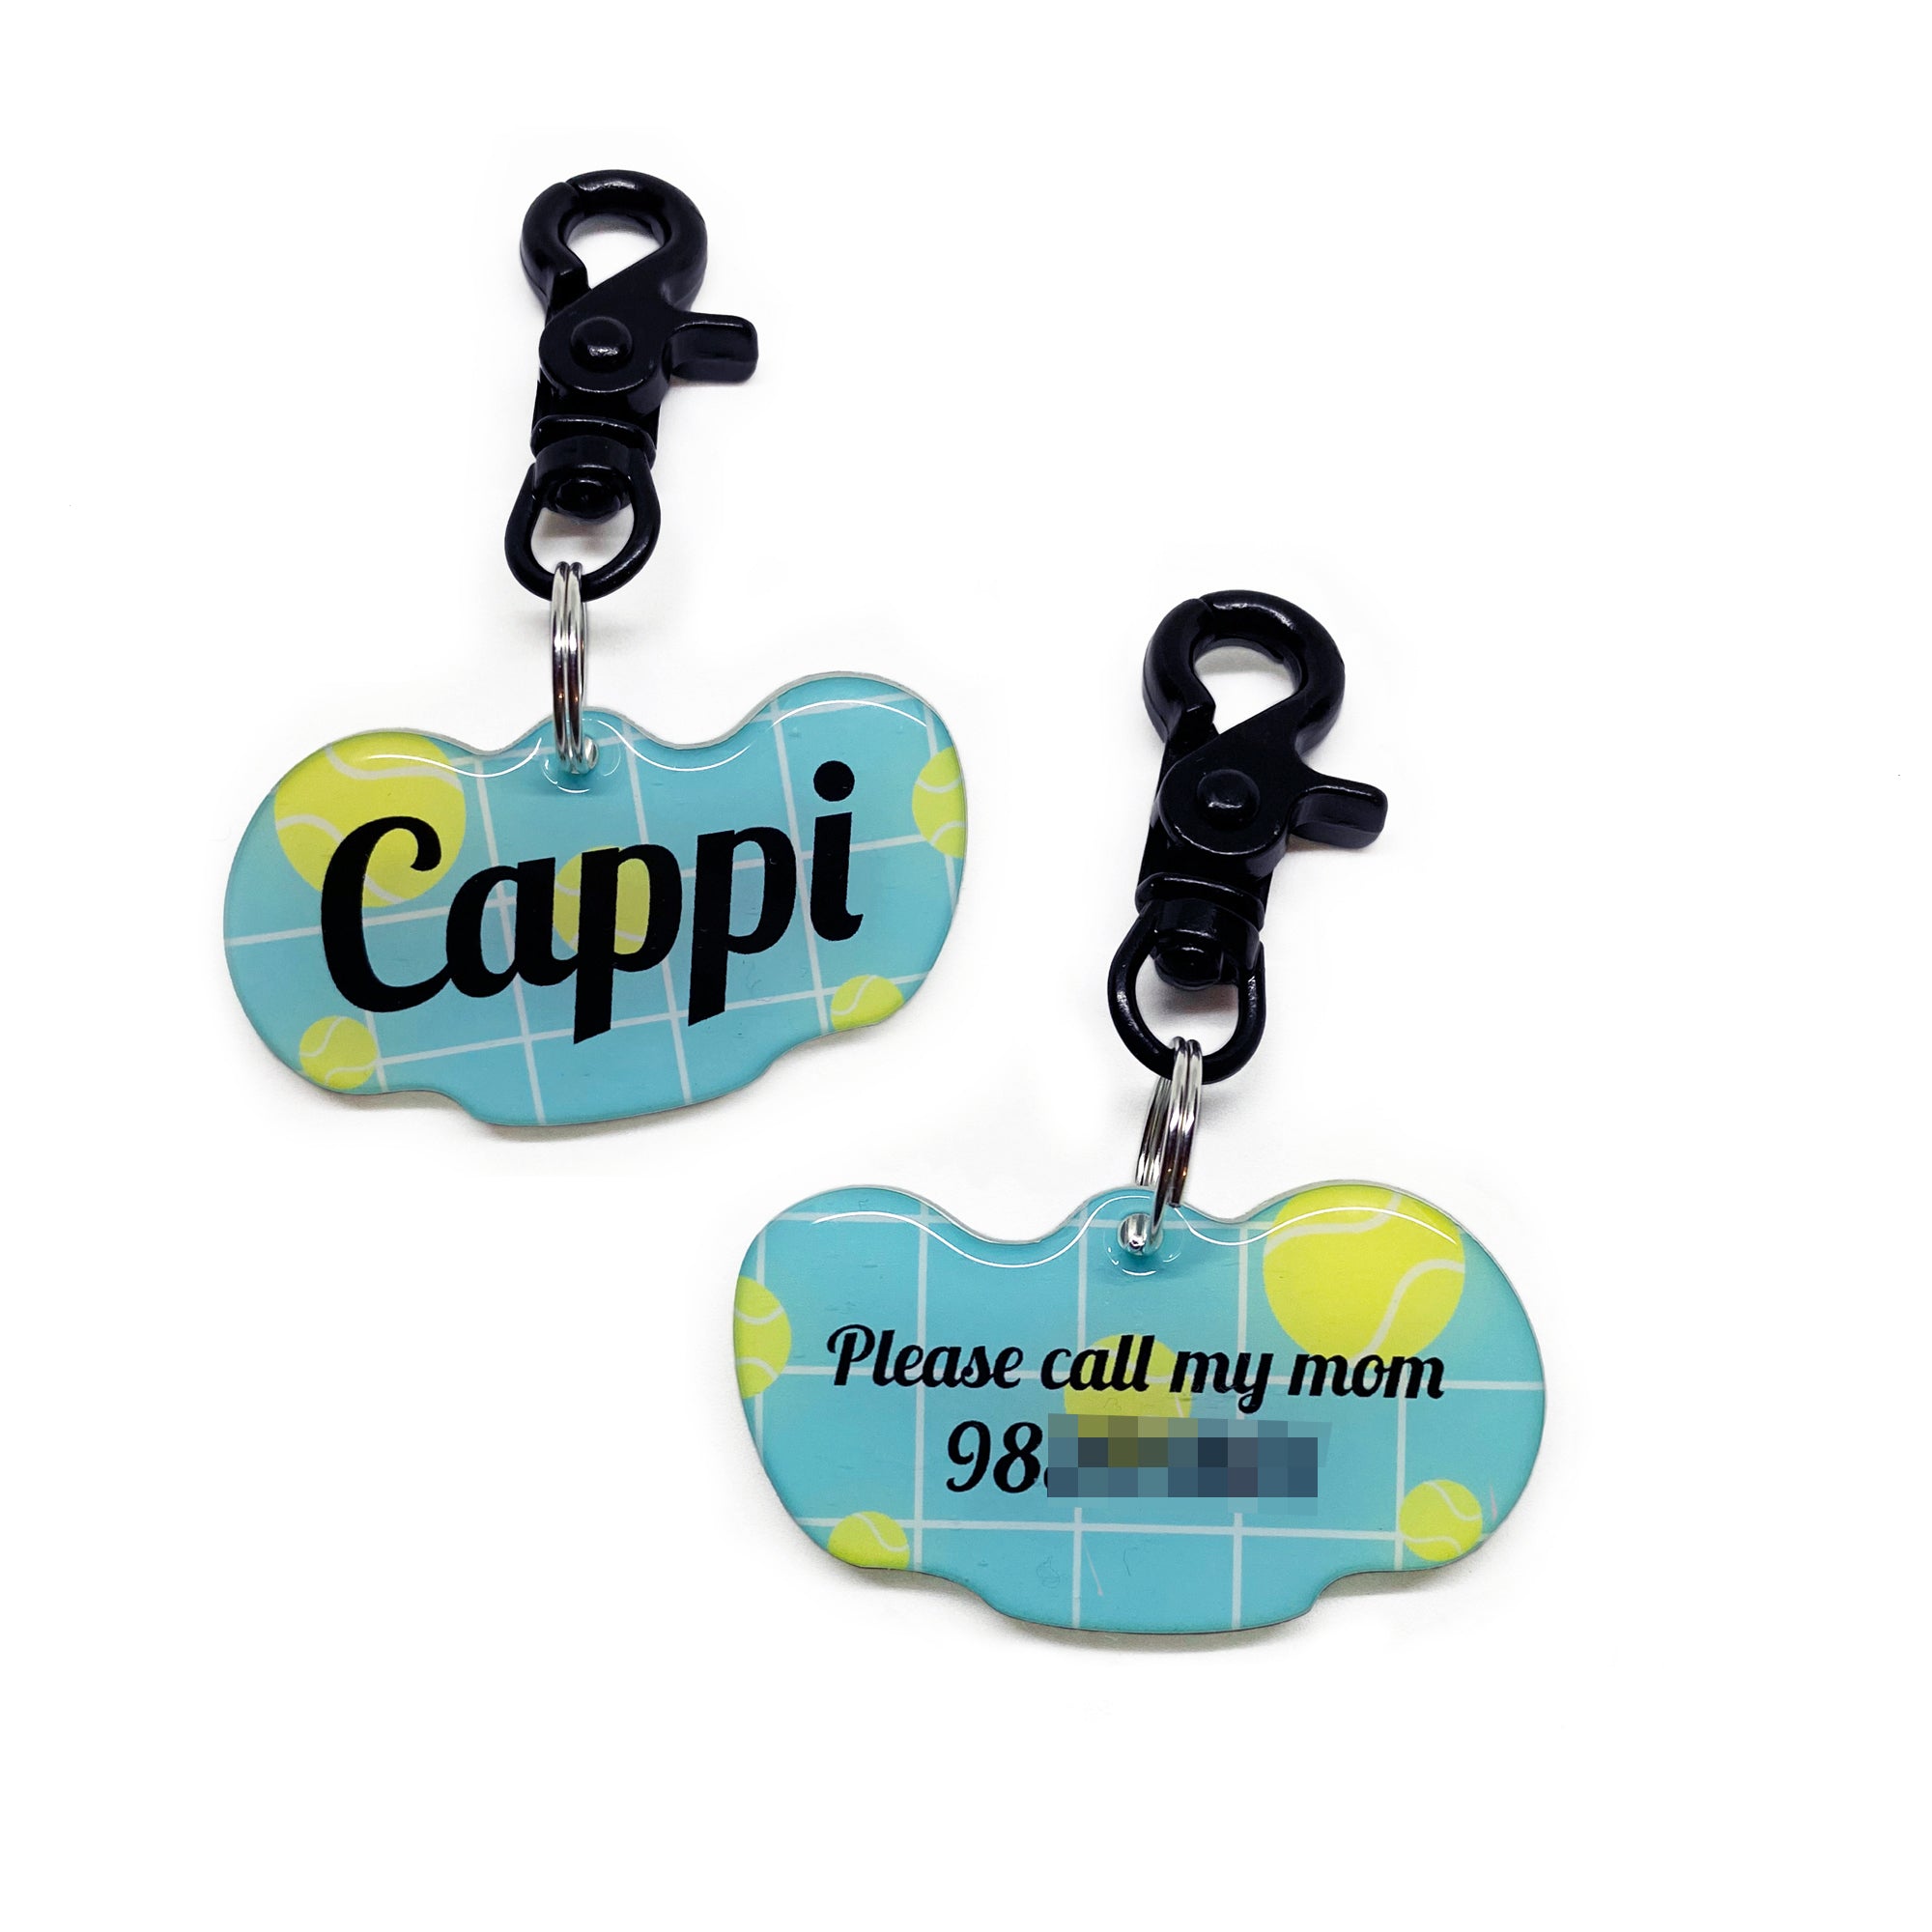 Puppy Gallery Tennis Bashtag - 2x Tags Dog Name Tags by Bashtags